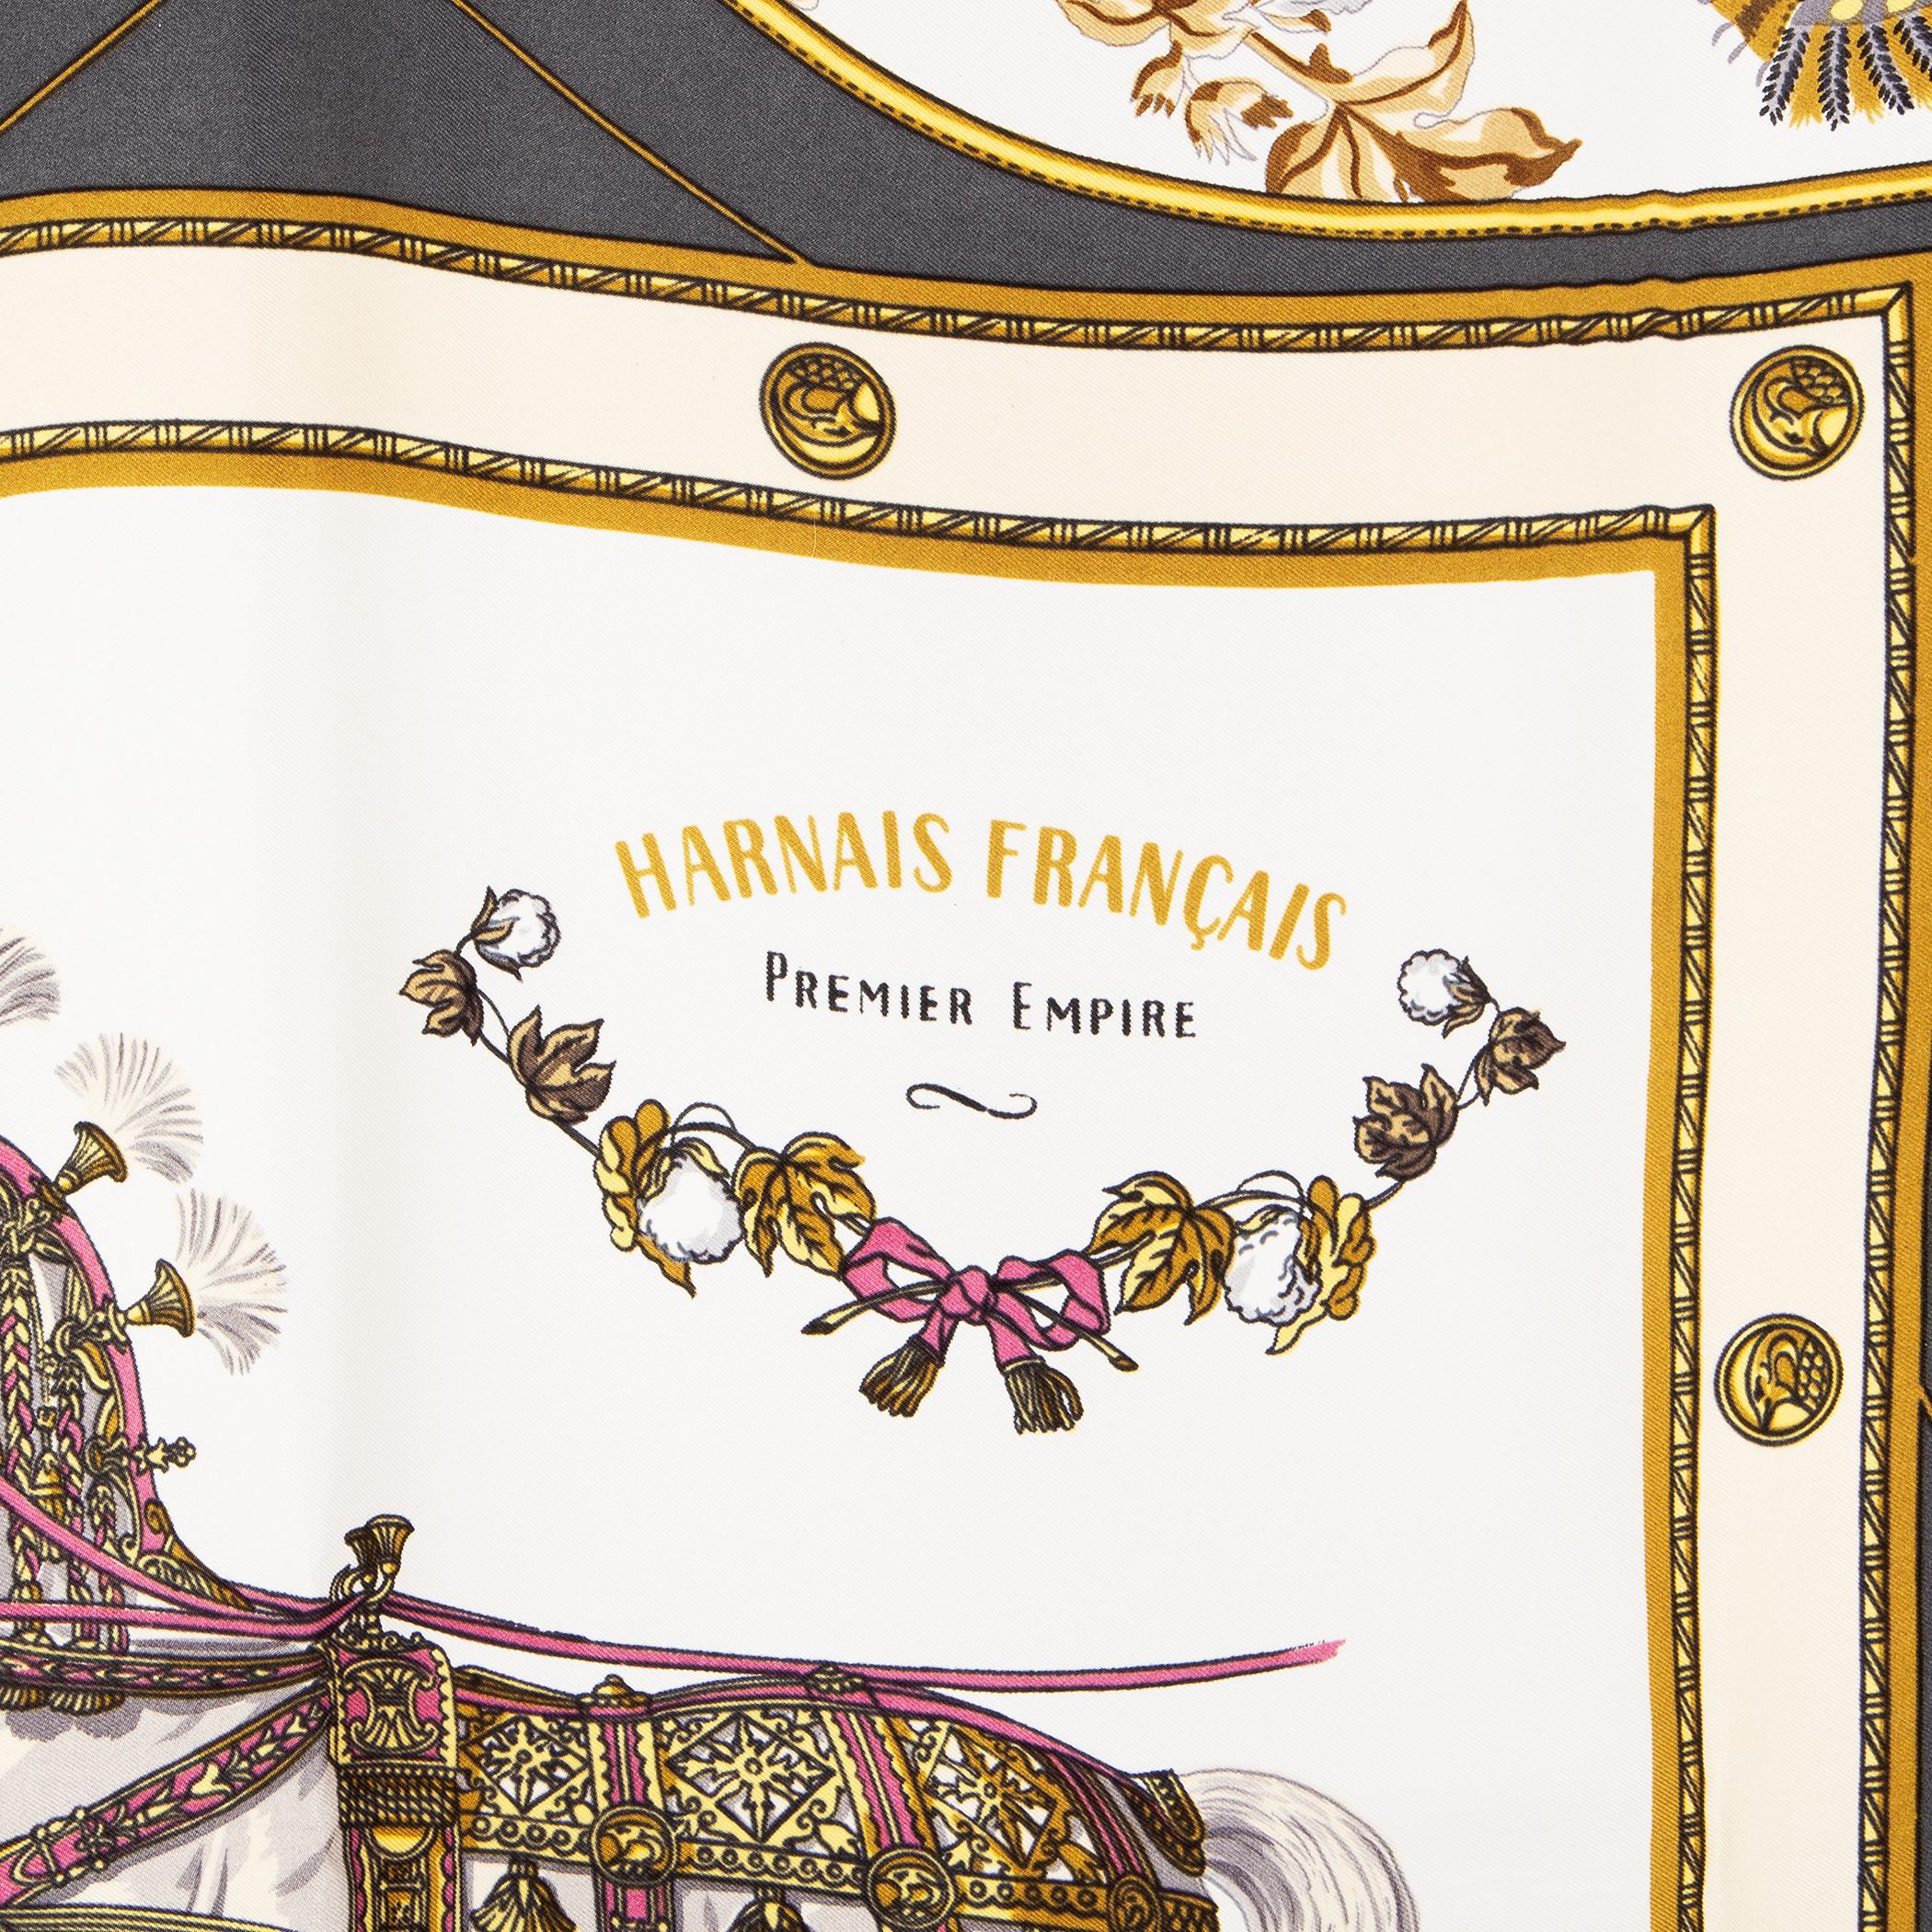 Hermes 'Harnais Francais Premier Empire 90' scarf in white silk twill (100%) with dark grey border and details in antique gold, beige and pink. Has been carried and is in excellent condition.

Width 90cm (35.1in)
Height 90cm (35.1in)